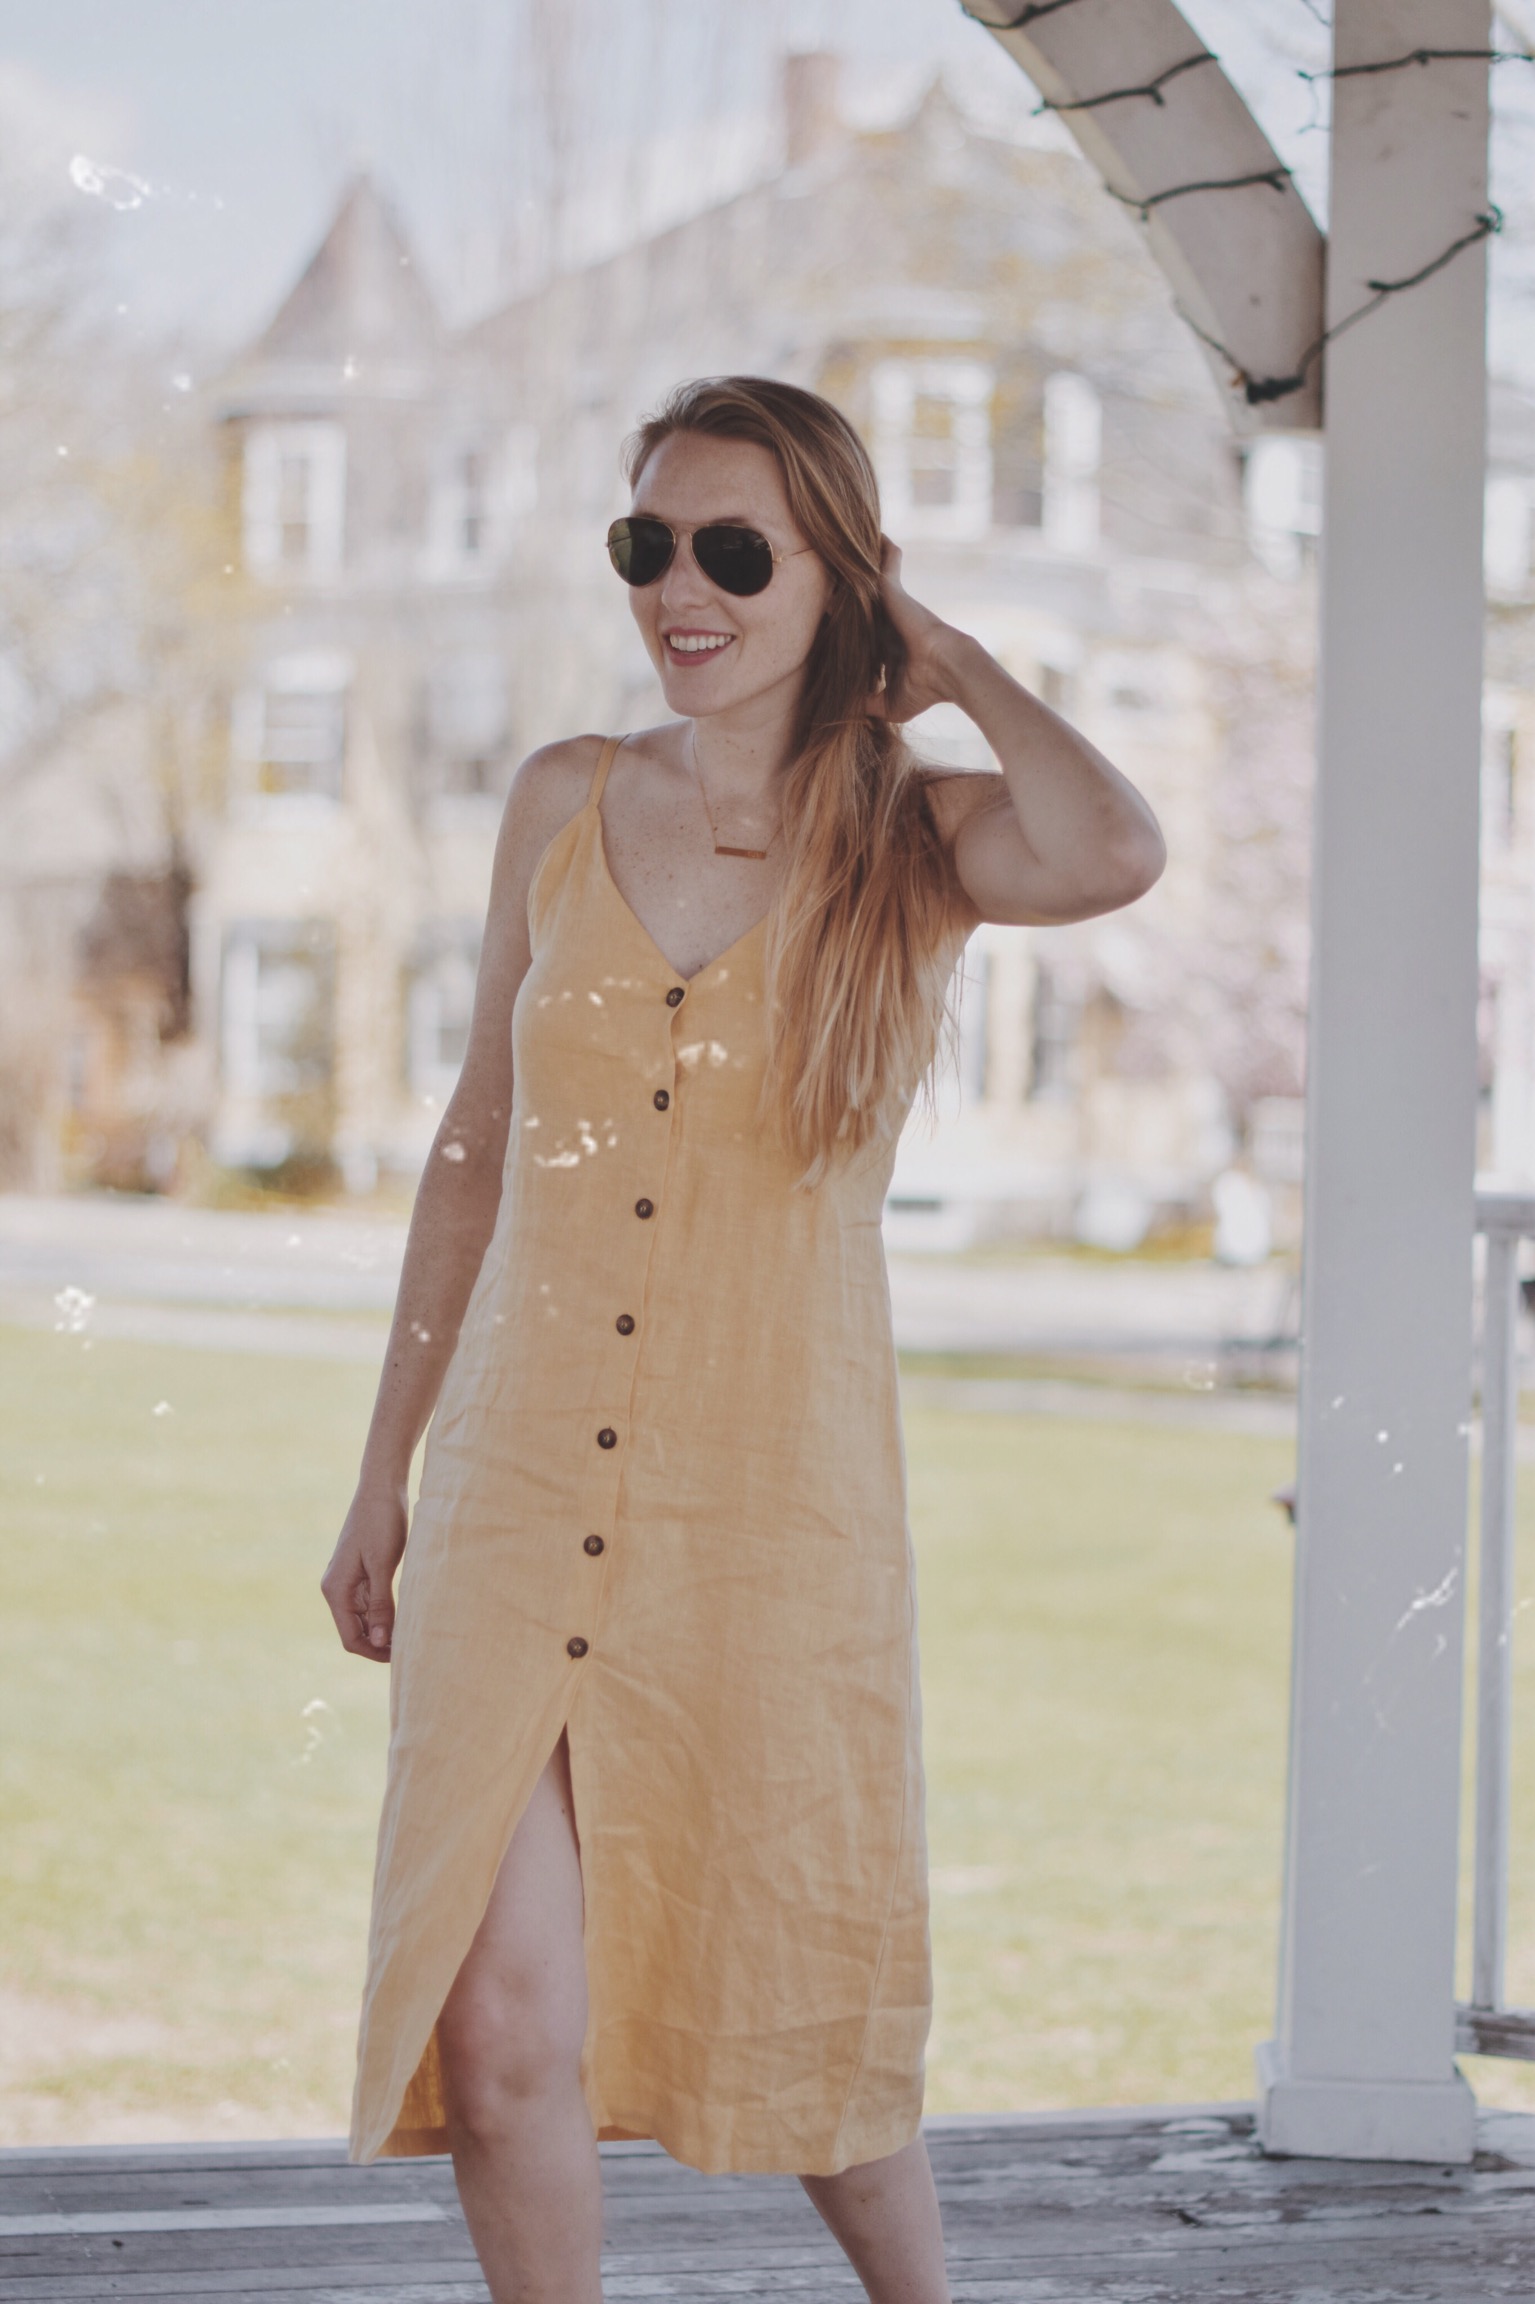 styling a canary yellow linen dress from Reformation as part of my summer capsule wardrobe of ethical fashion brands